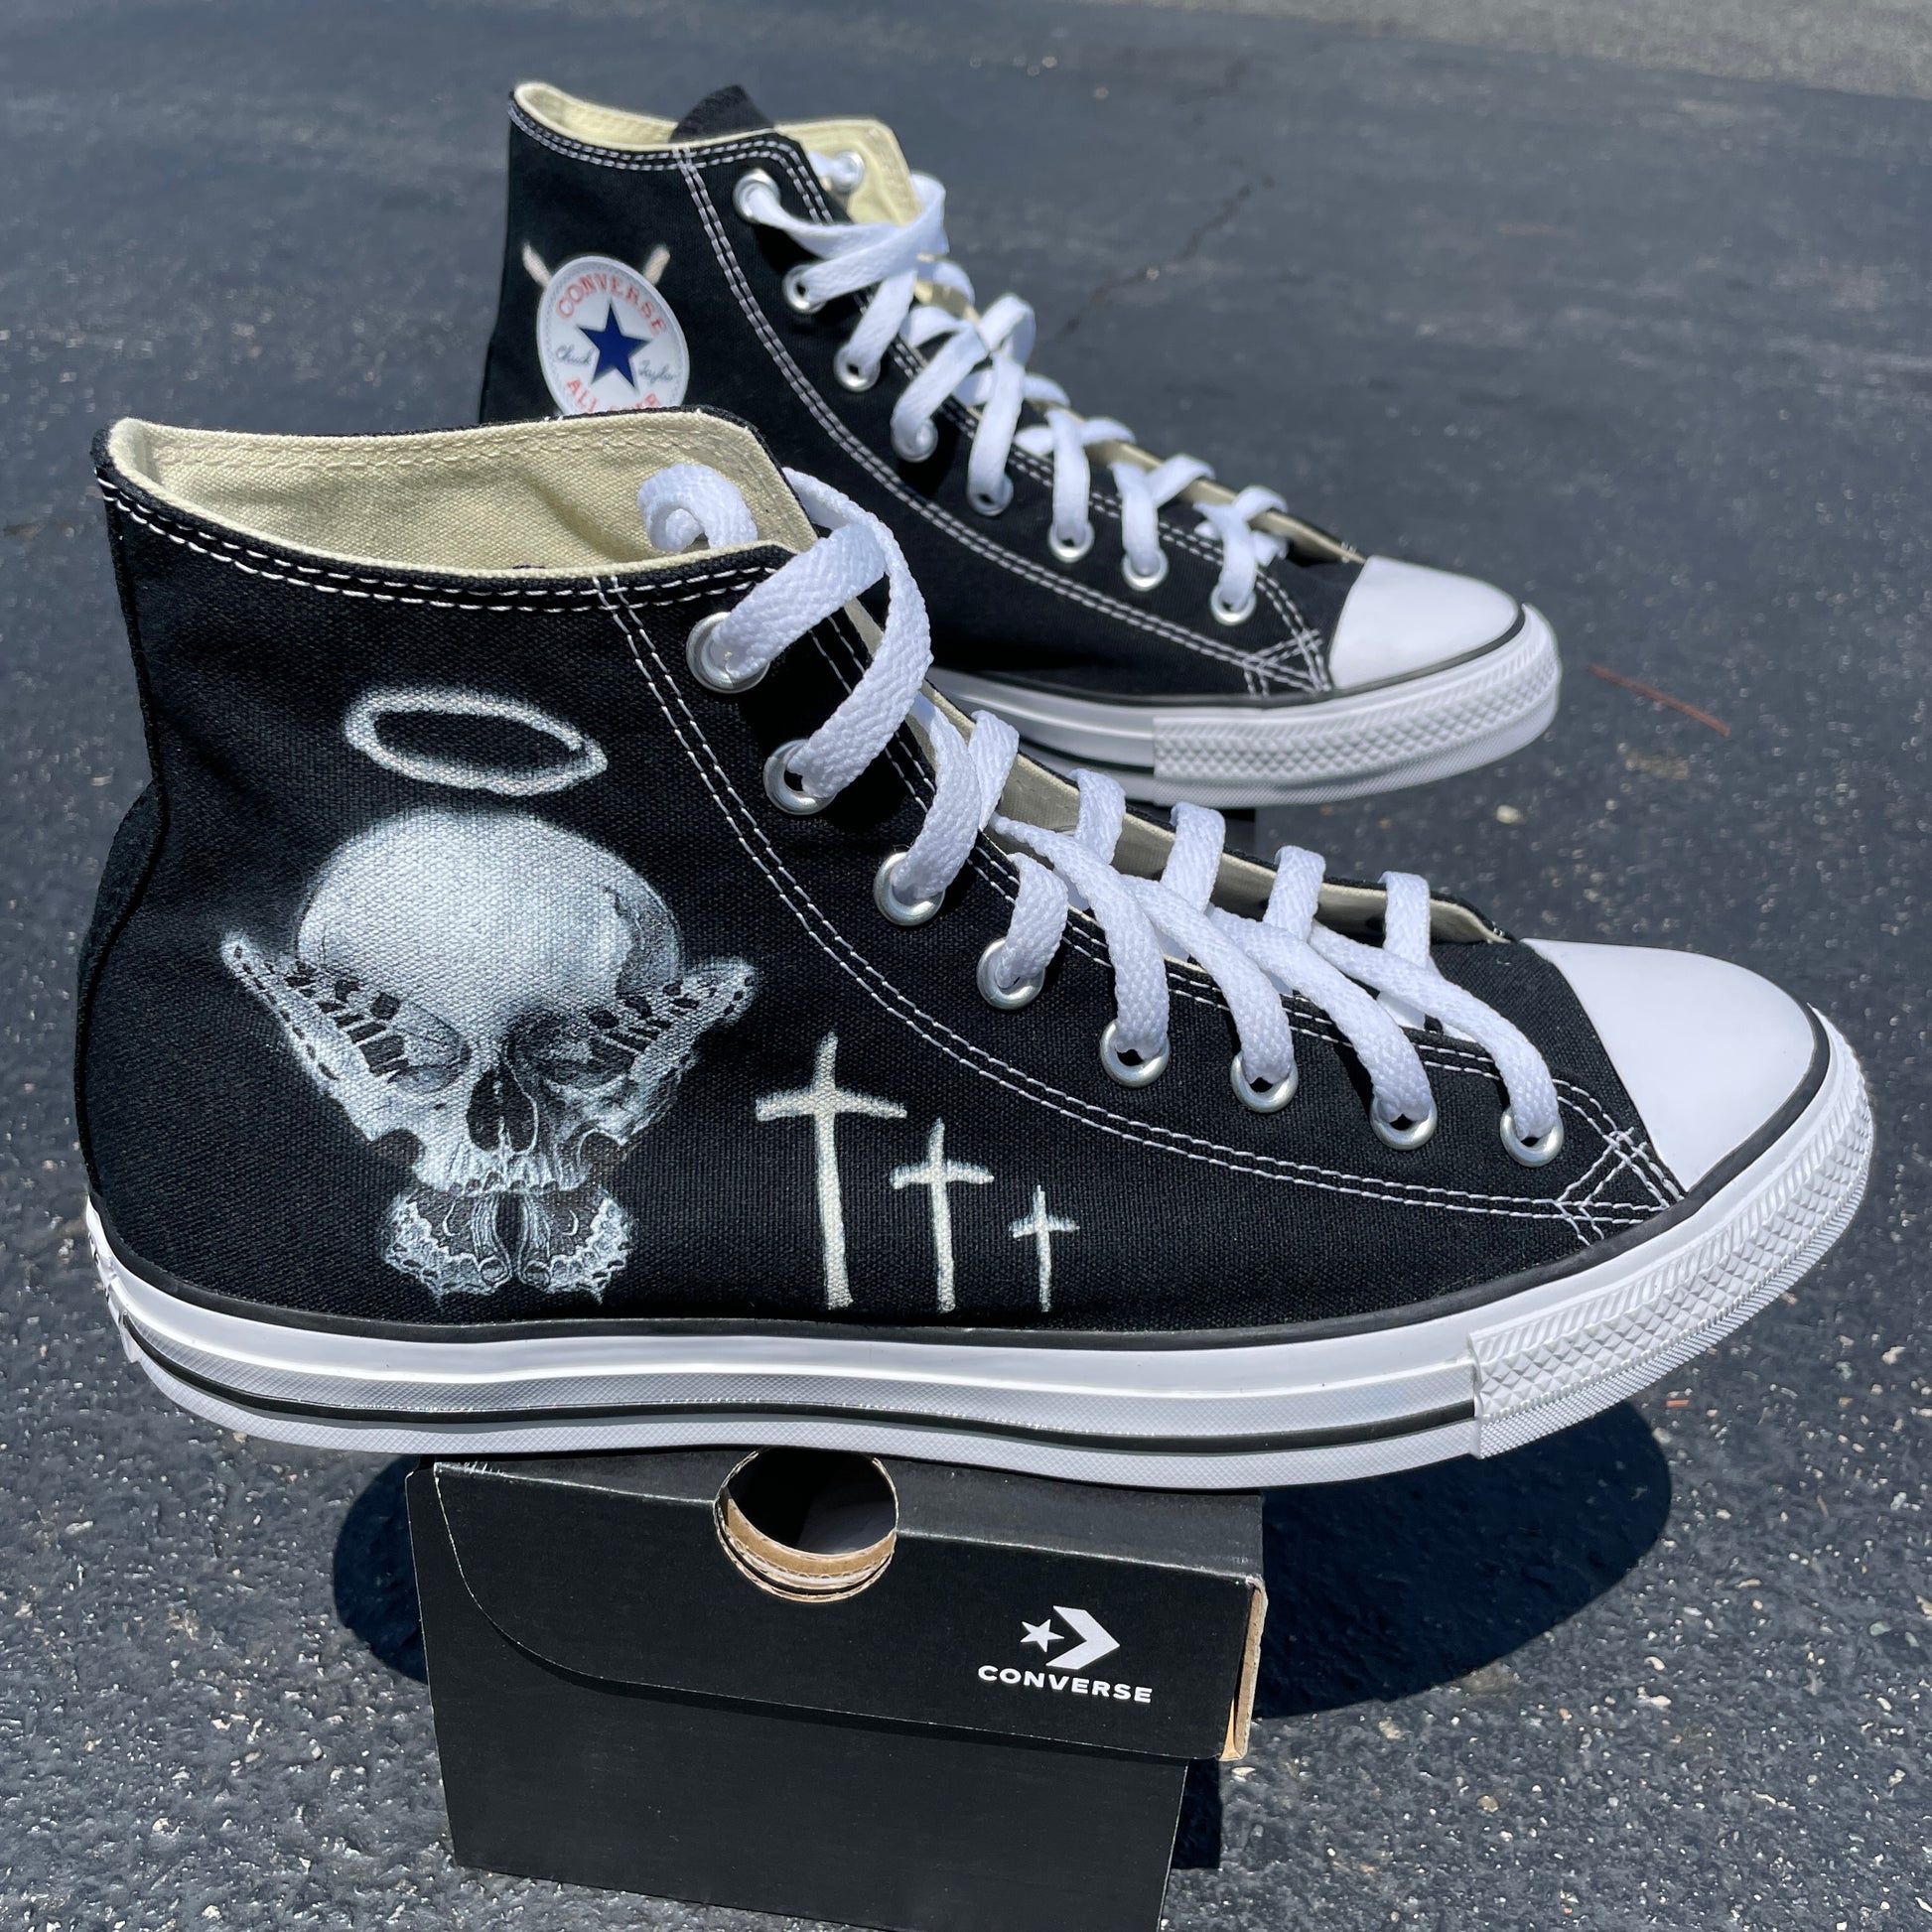 Consequential Clothing x Butterfly Effect Skull - Black High Tops - Custom  Converse Shoes